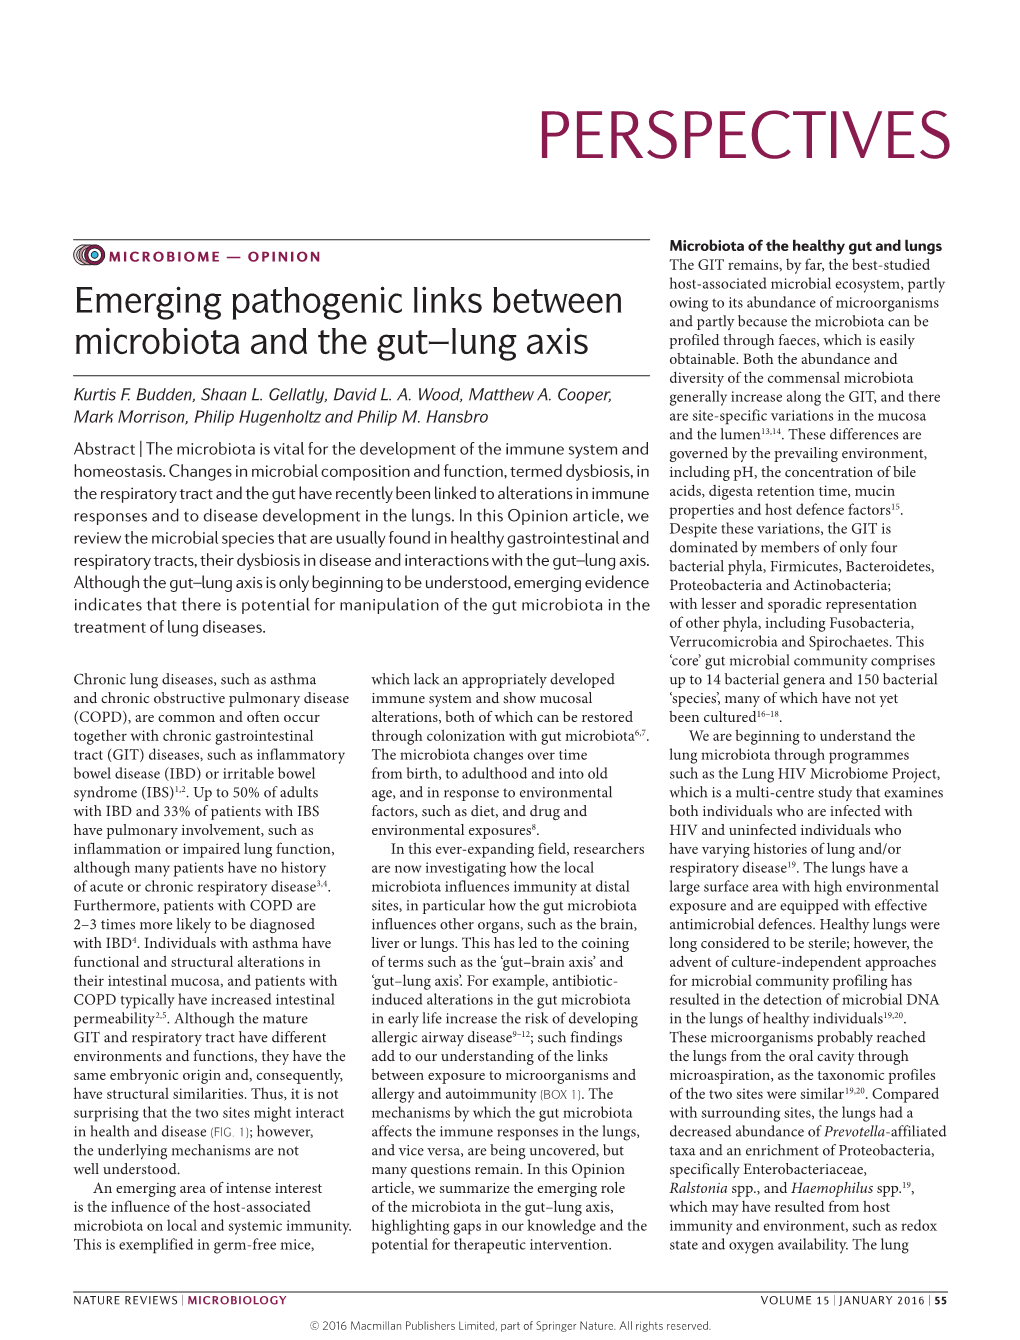 Emerging Pathogenic Links Between the Microbiota and the Gut–Lung Axis